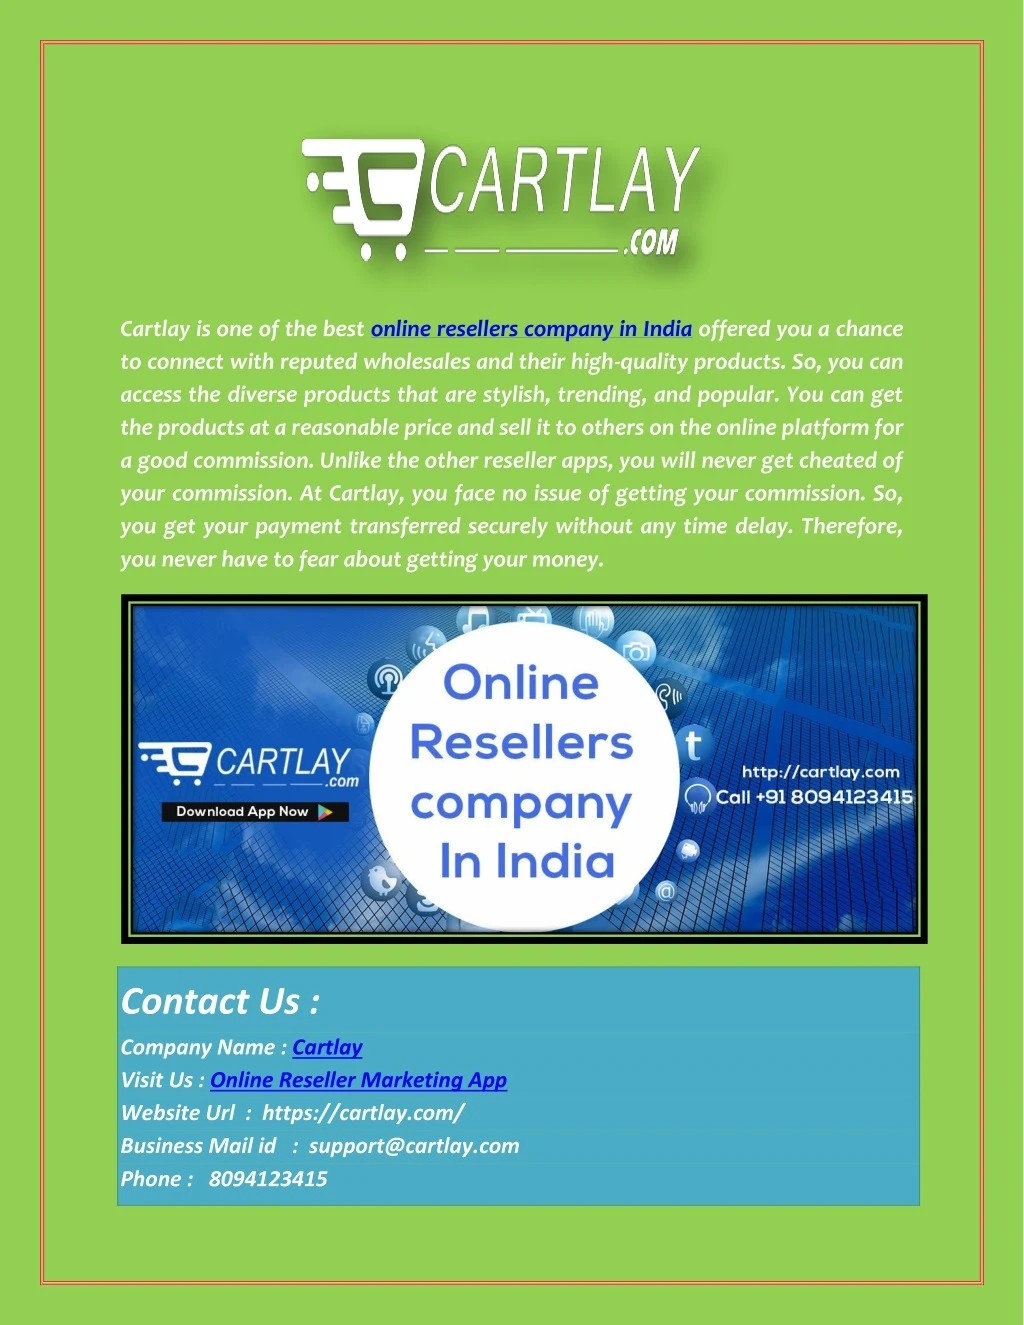 cartlay is one of the best online resellers